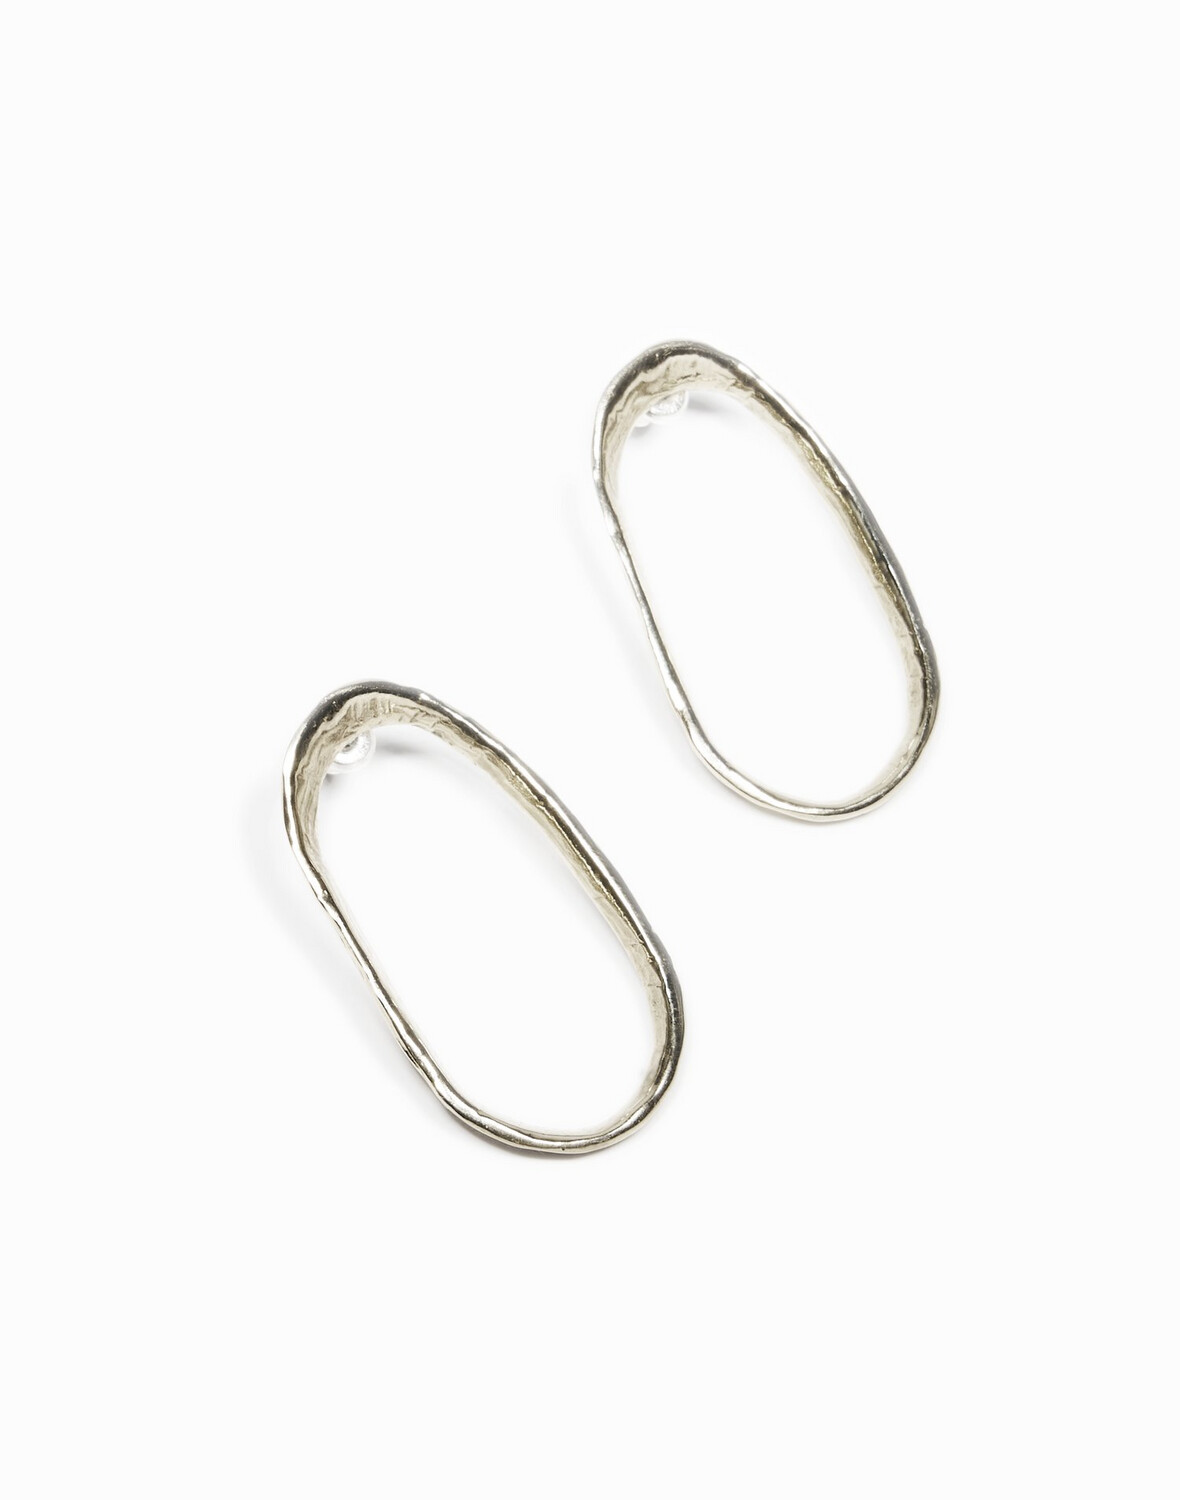 Odette Ny Tidal Hoop in Recycled Sterling Silver